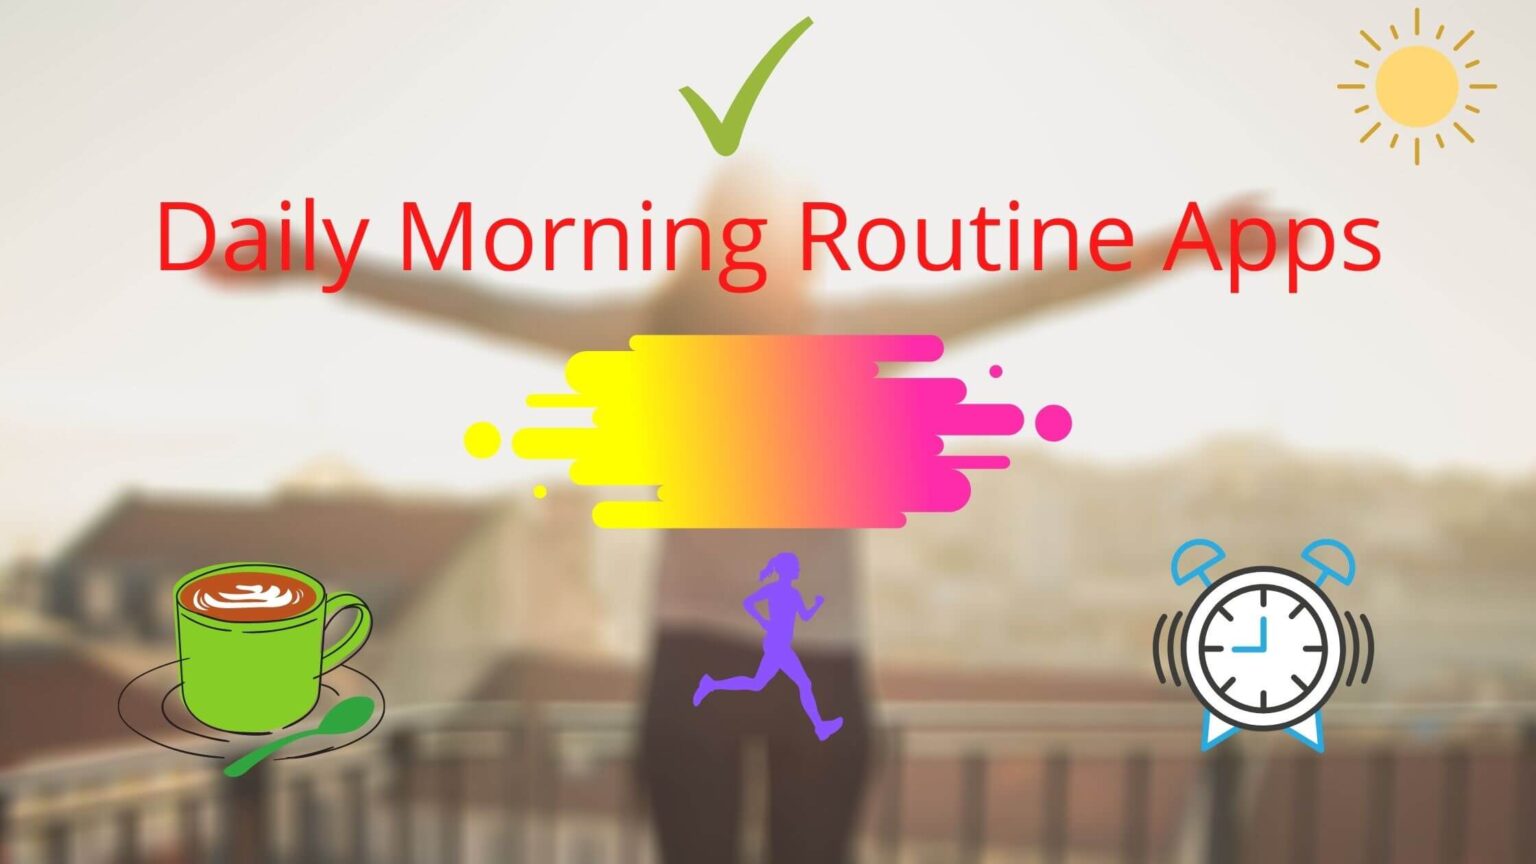 7-best-daily-morning-routine-apps-for-a-happy-life-seeromega